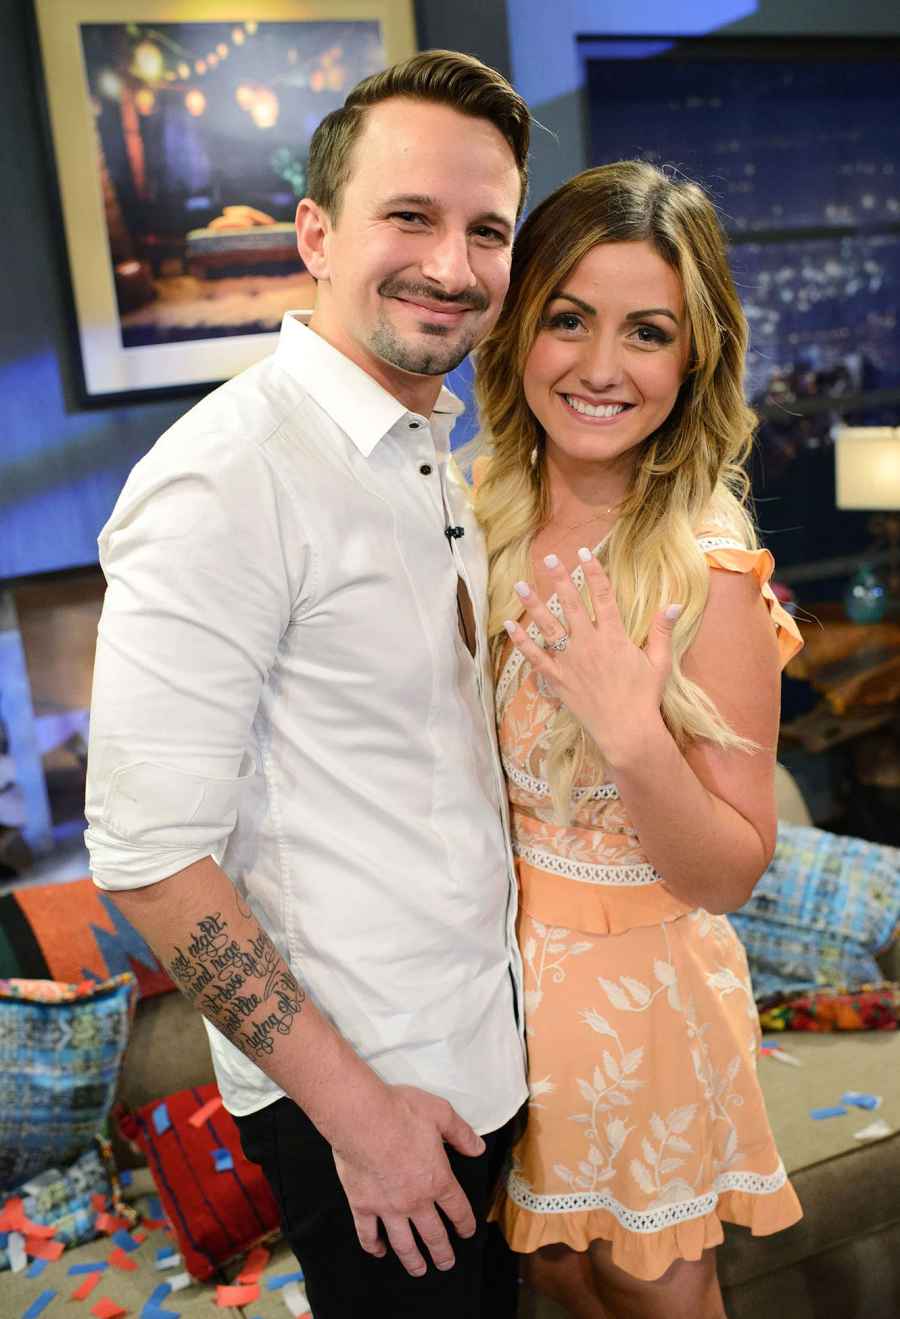 Bachelor in Paradise's Evan Bass and Carly Waddell Quotes About Their Split and Coparenting